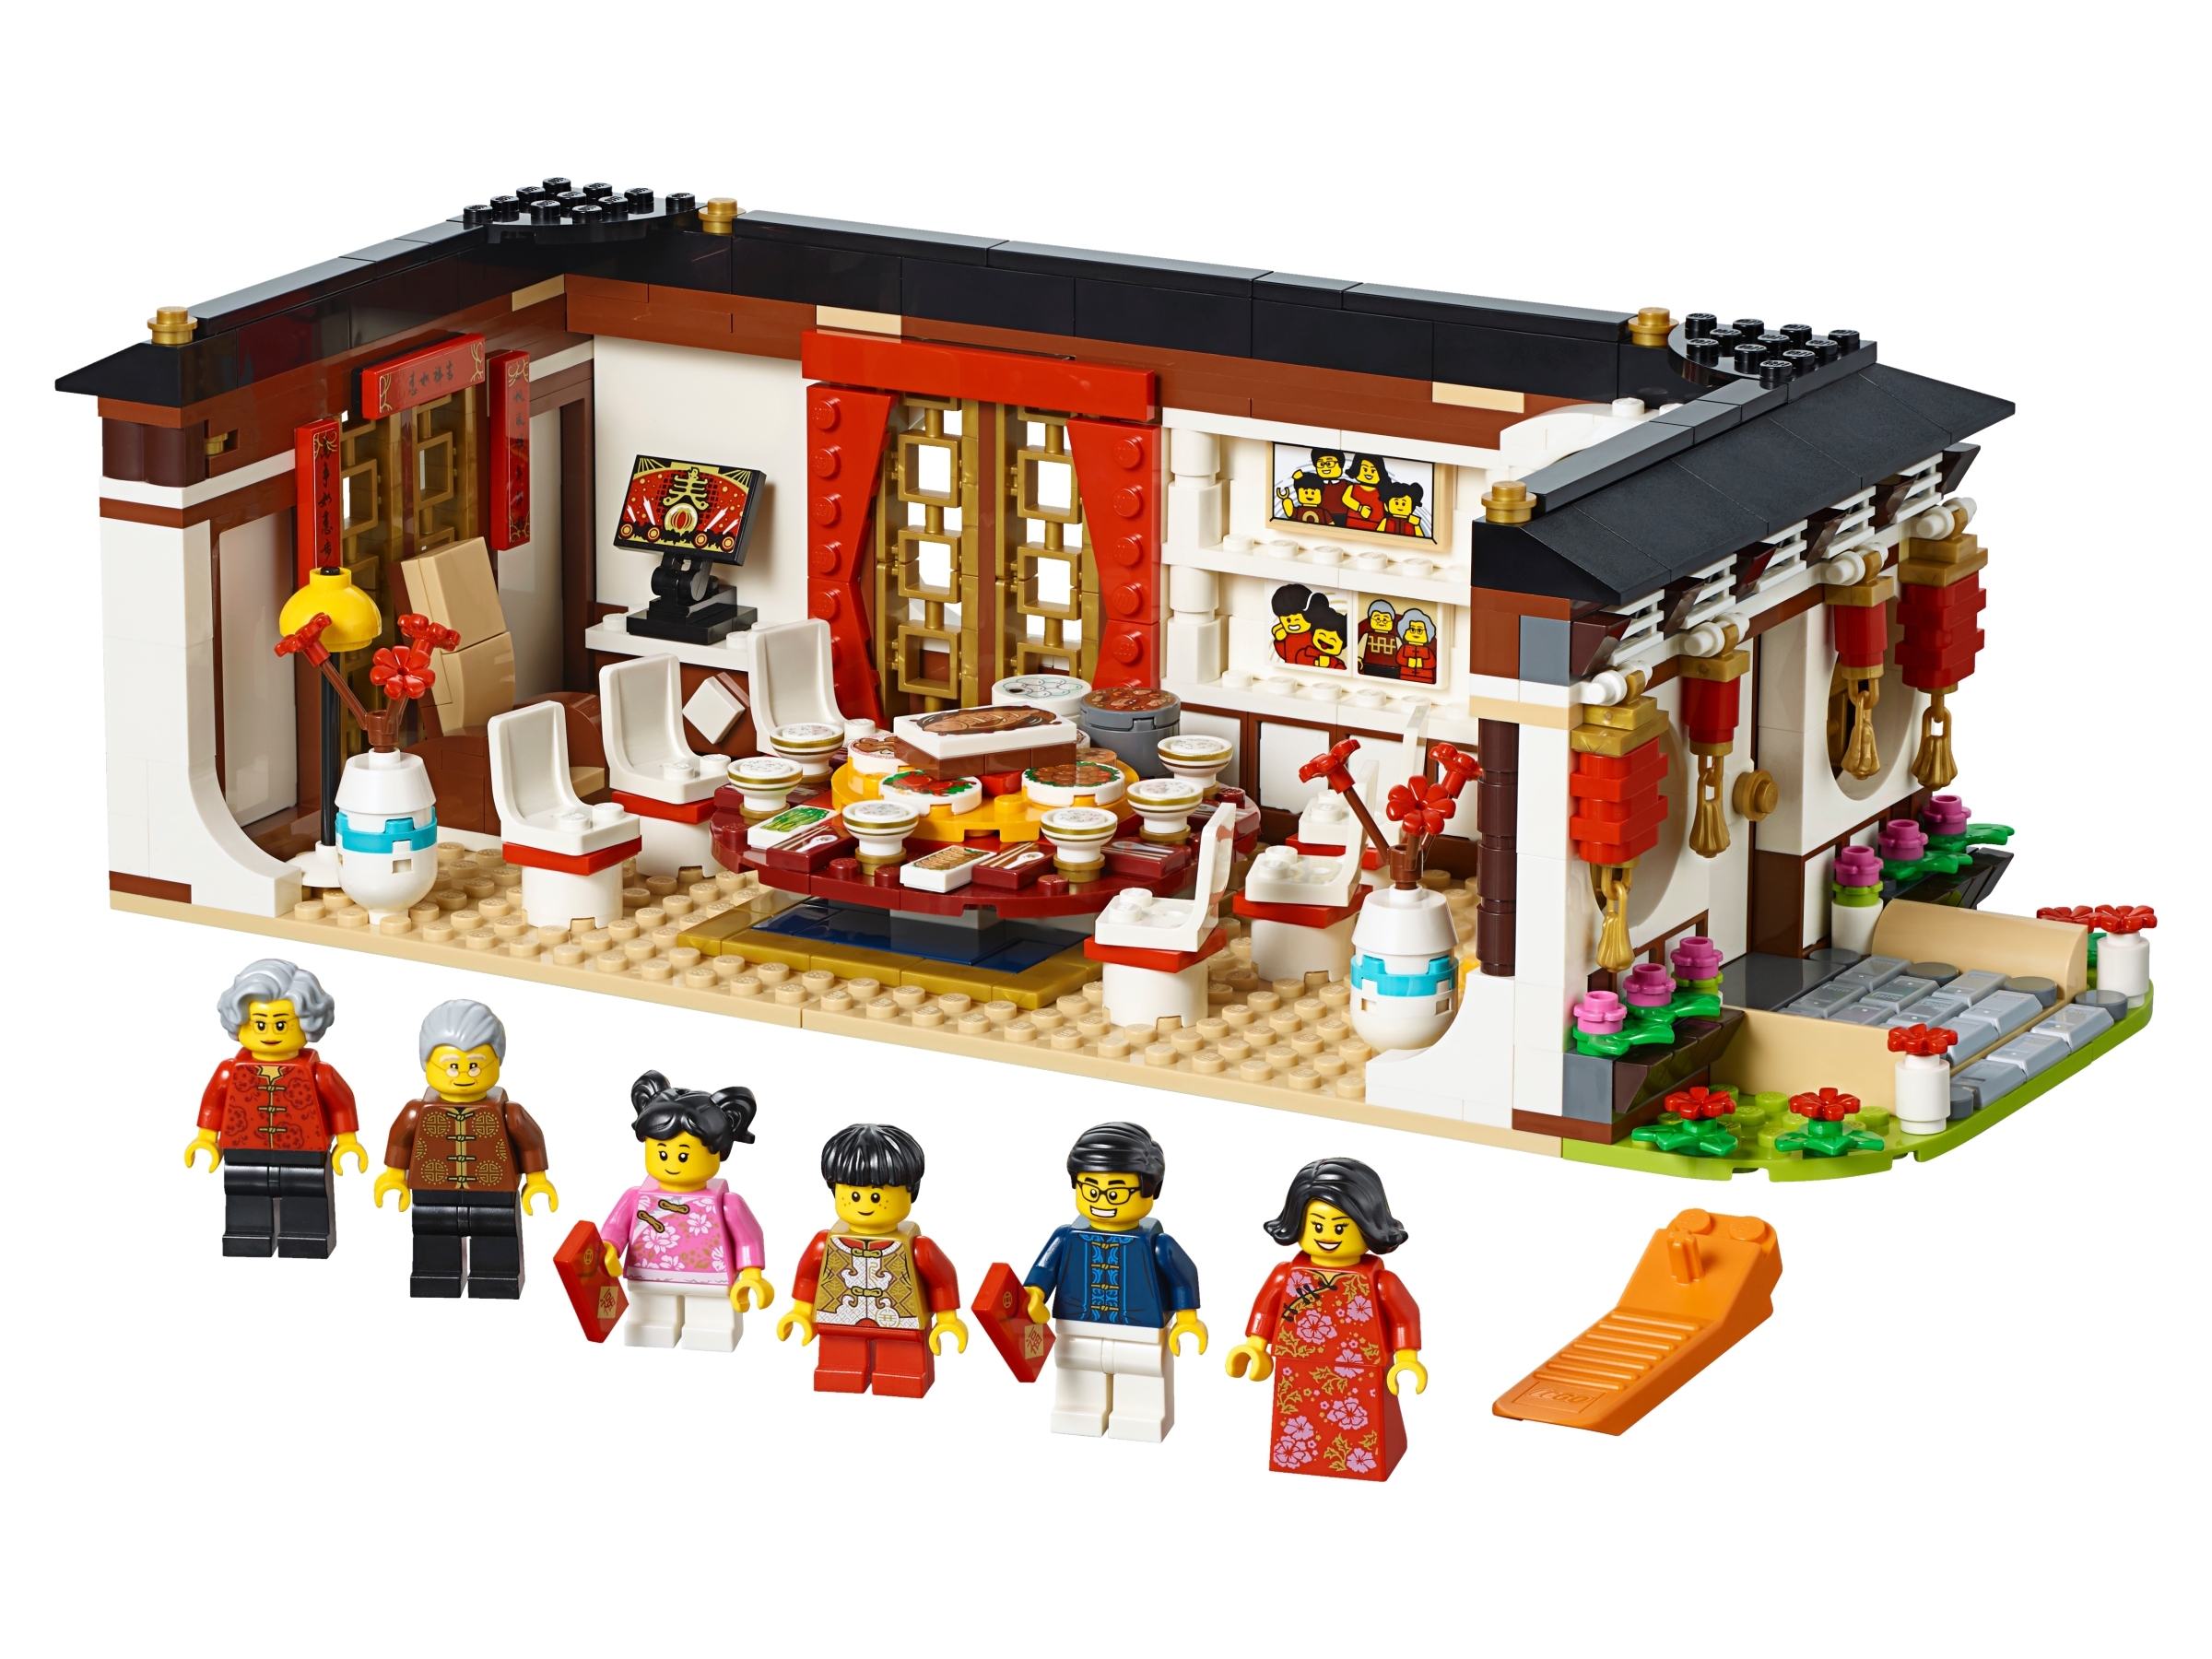 chinese new year's eve dinner lego